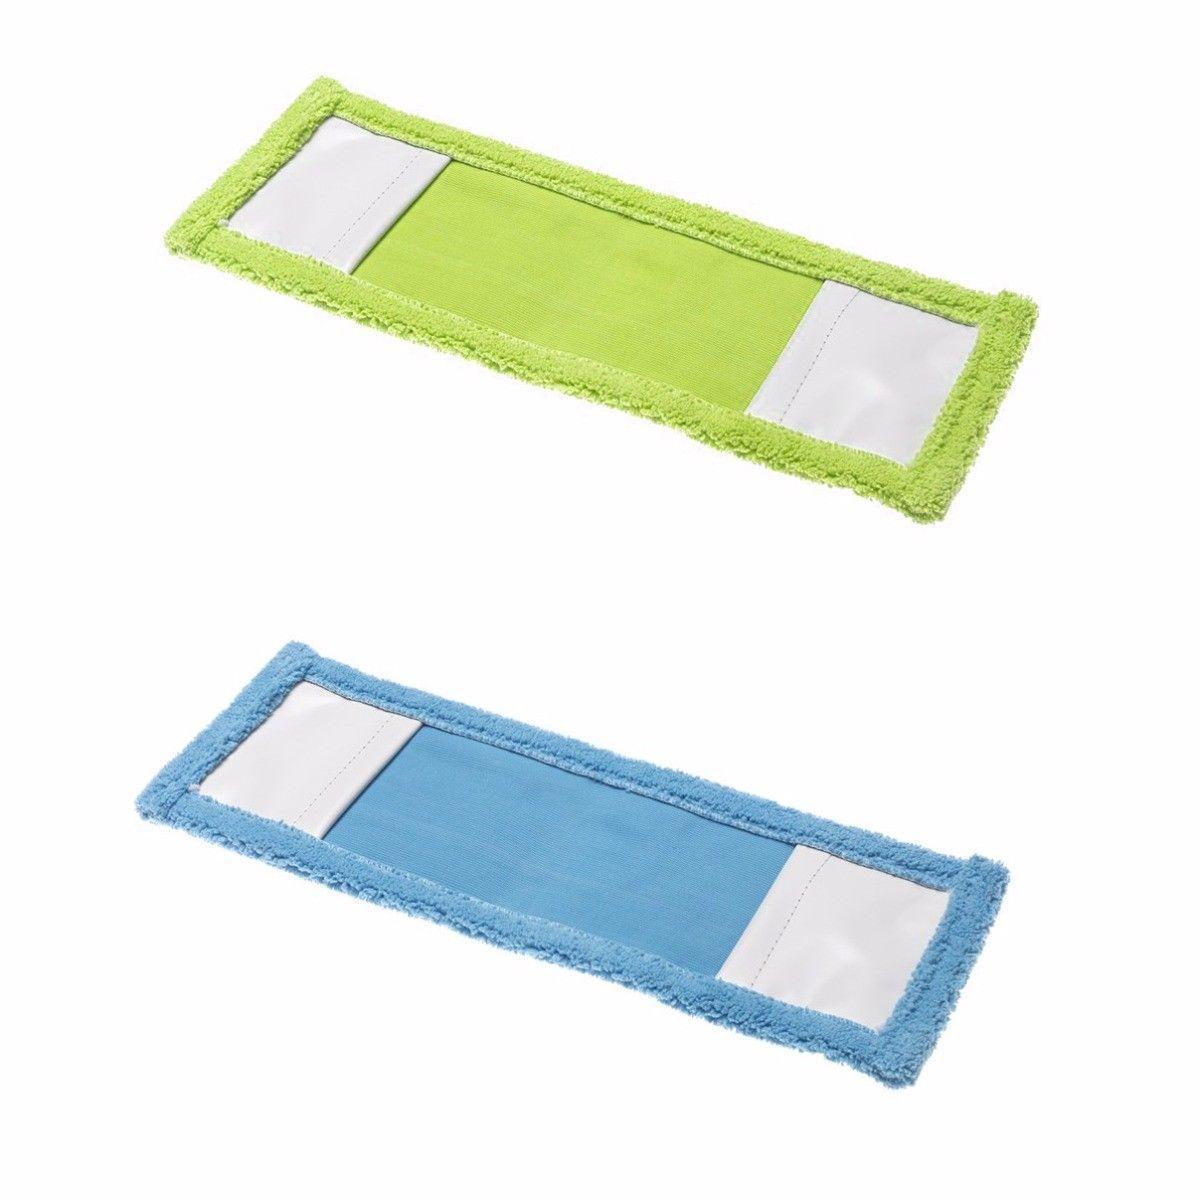 Microfiber Assorted Colour Dust Cover 35cm 2548 (Large Letter Rate)